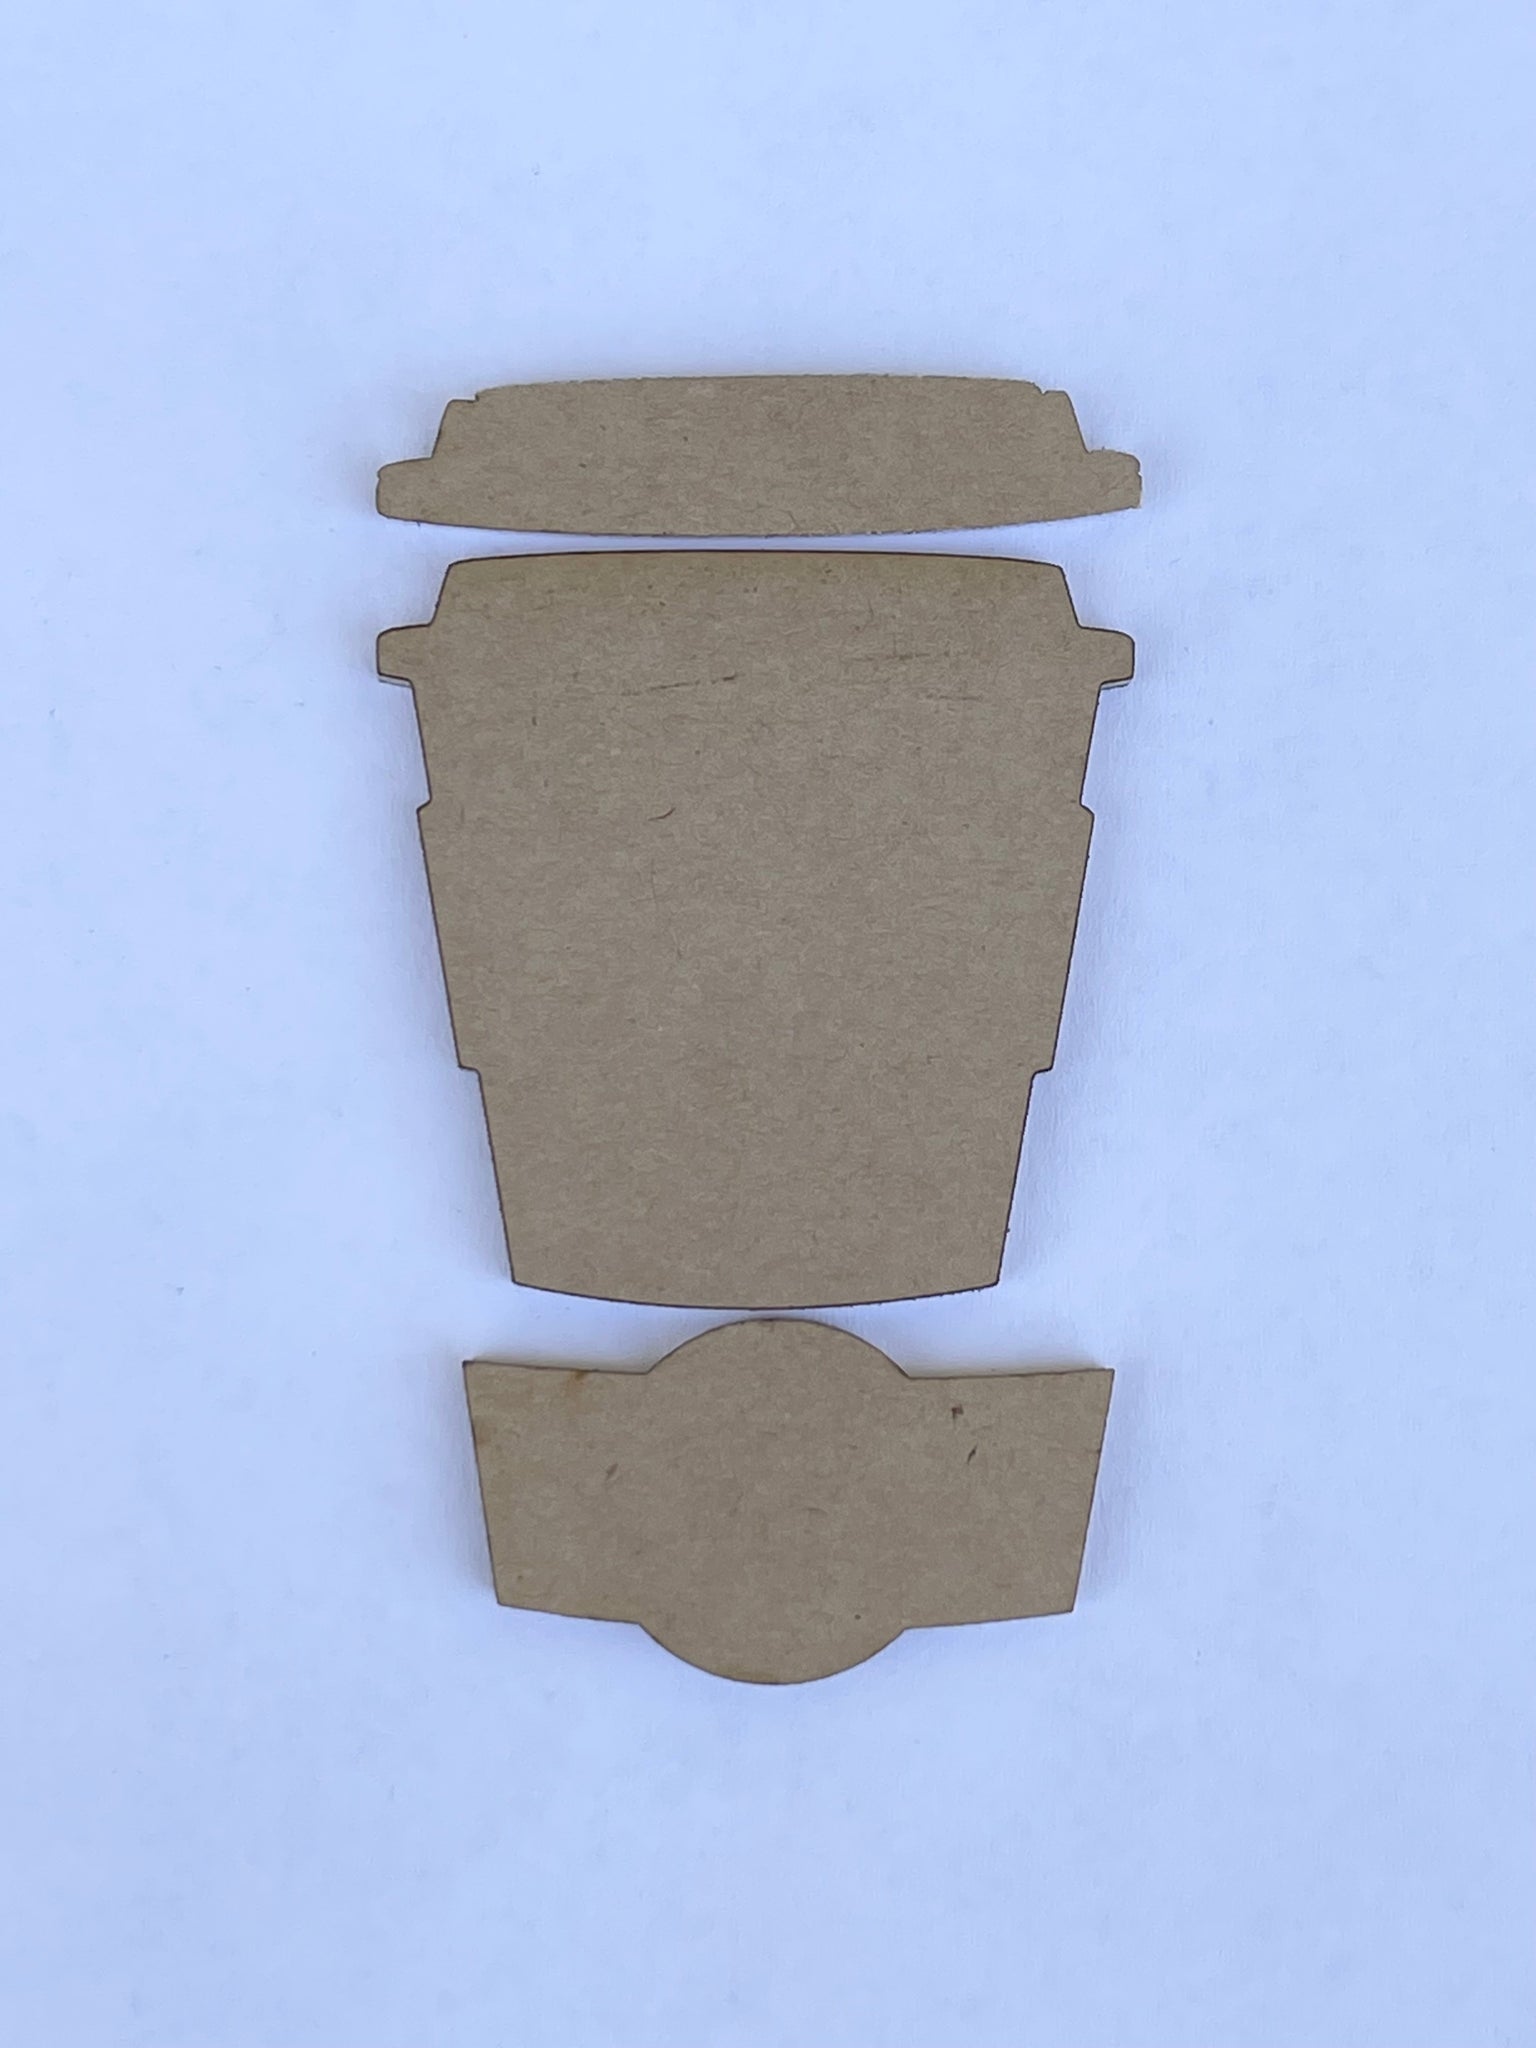 COFFEE LATTE CUP Acrylic Blank Badge Reel Cover Sets of 5, Acrylic